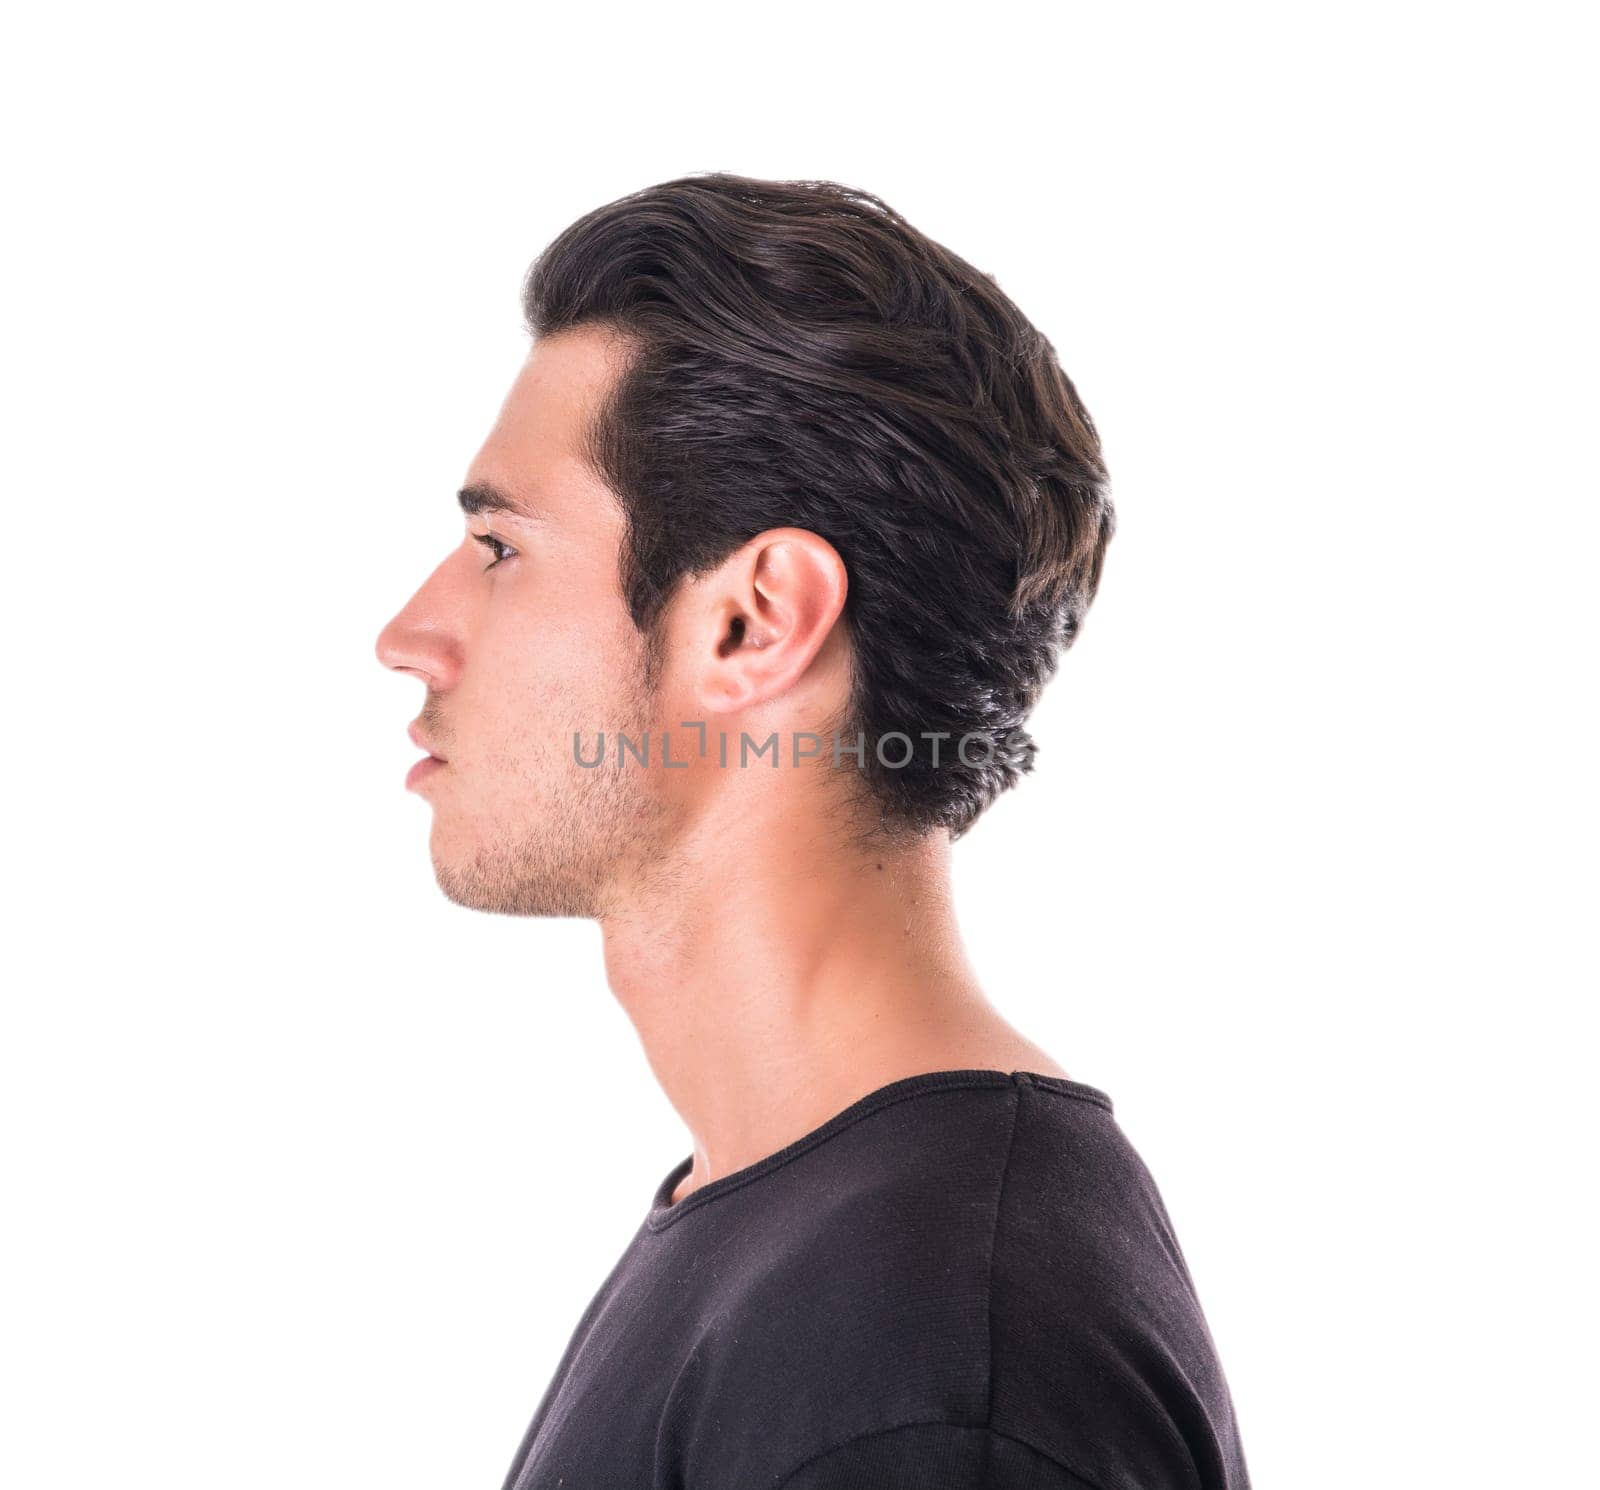 A man in a black shirt looking off to the side